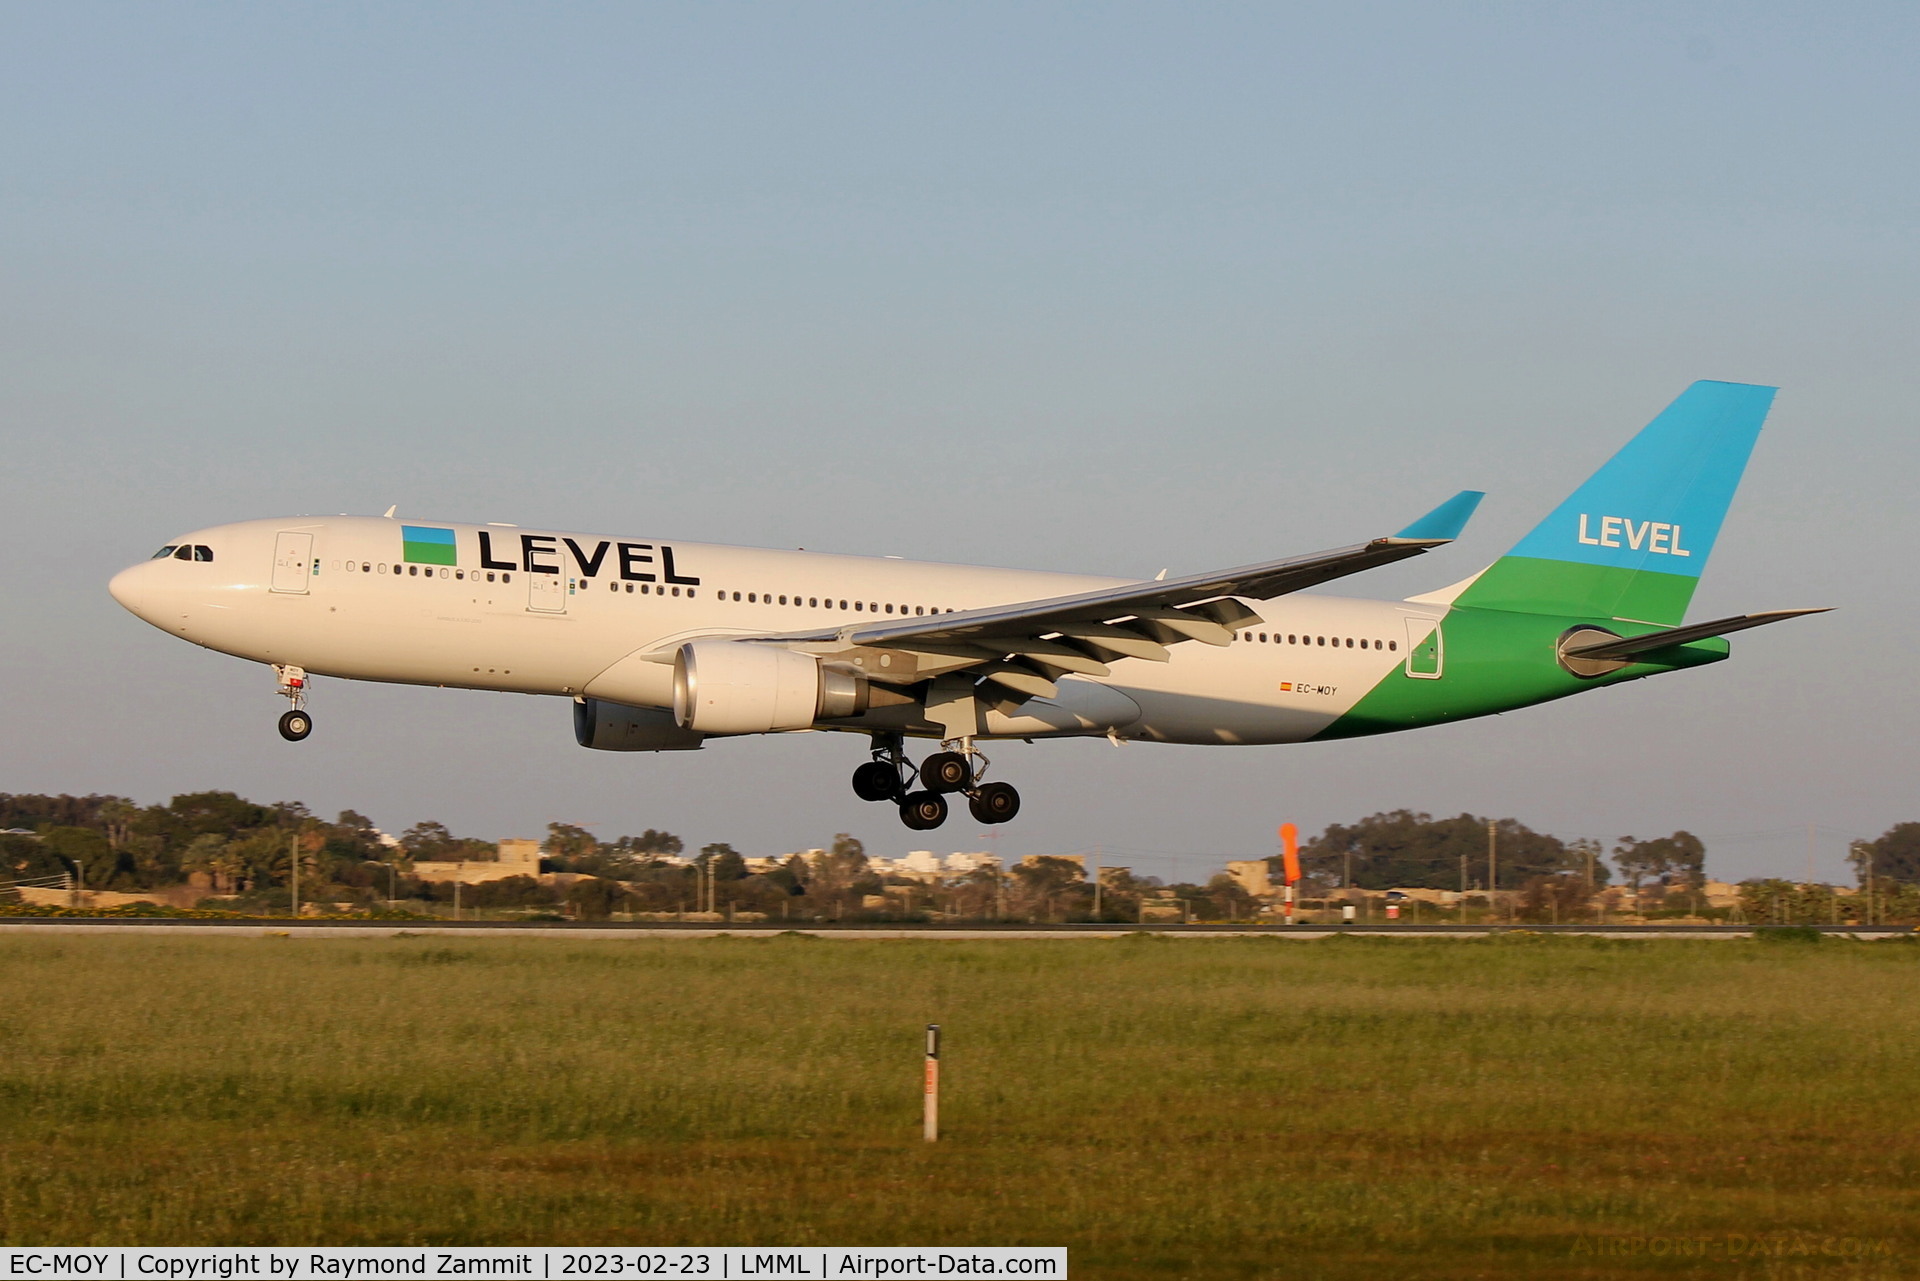 EC-MOY, 2017 Airbus A330-202 C/N 1784, A330 EC-MOY Level Airlines